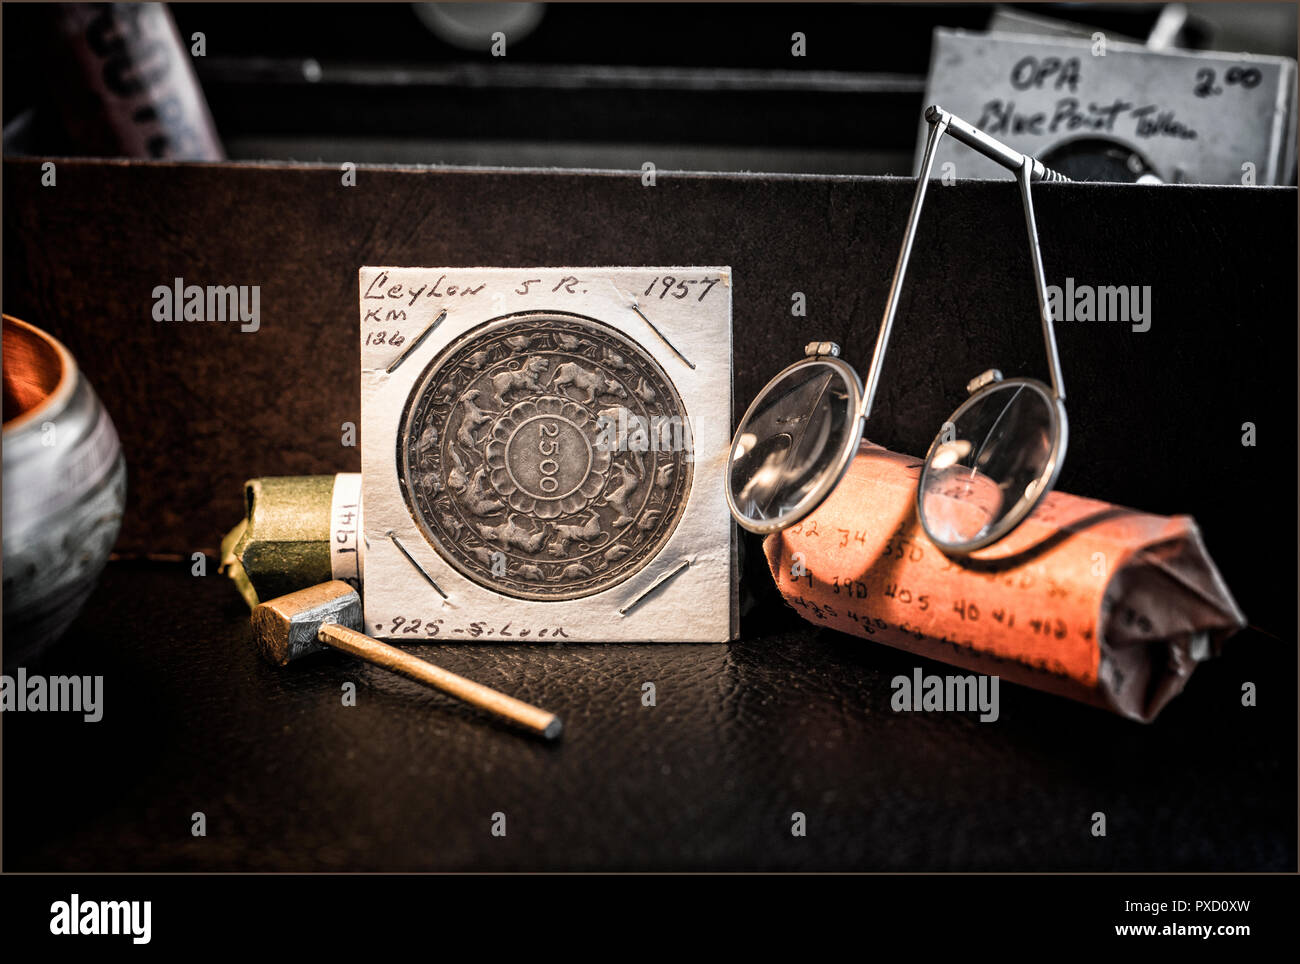 Coin Collector's Desk with rolled coins, magnifiers, Ceylon 2500 years of Buddhism Coin Stock Photo